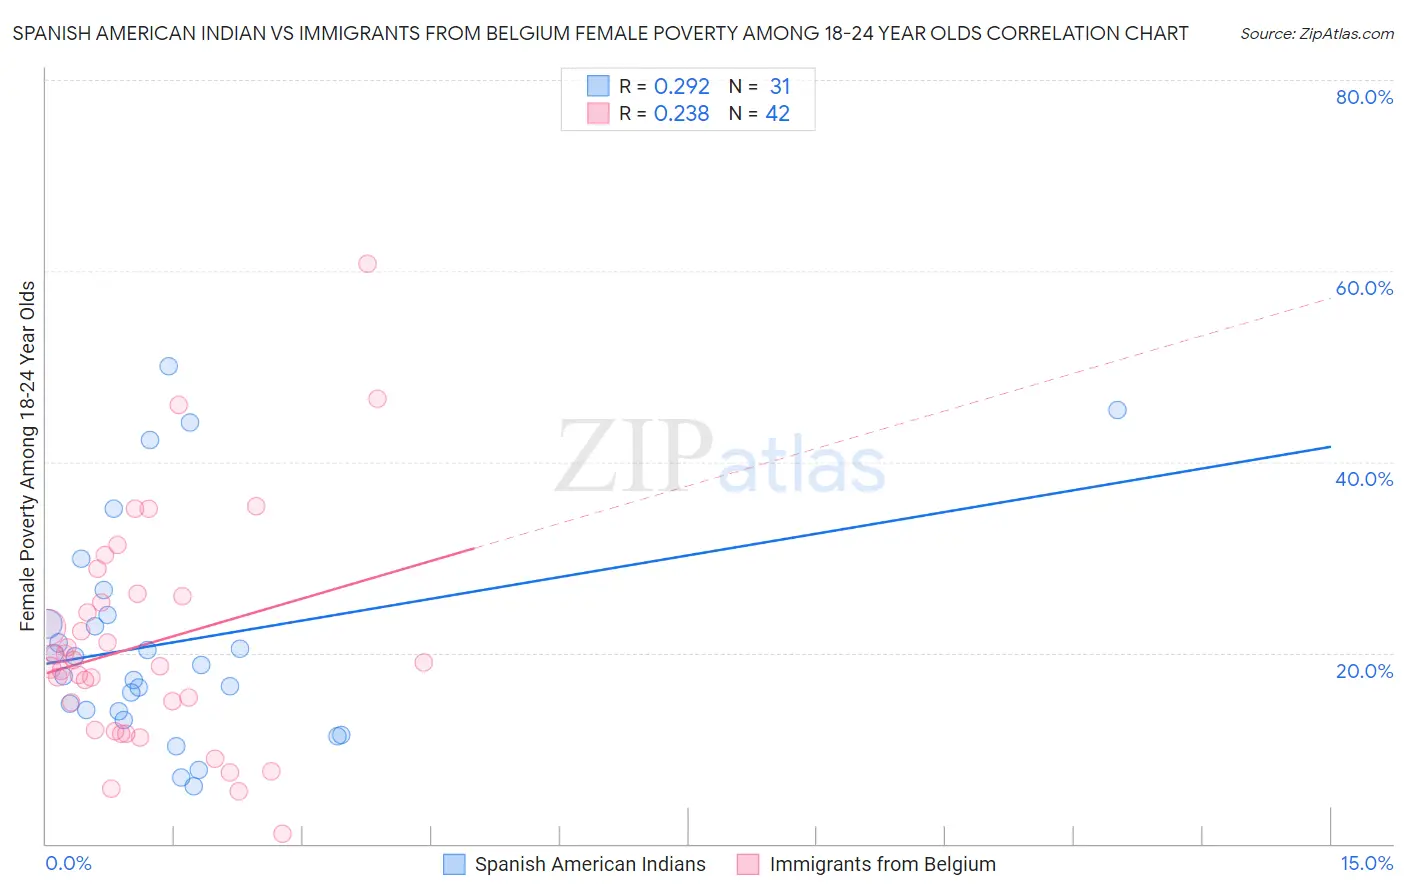 Spanish American Indian vs Immigrants from Belgium Female Poverty Among 18-24 Year Olds